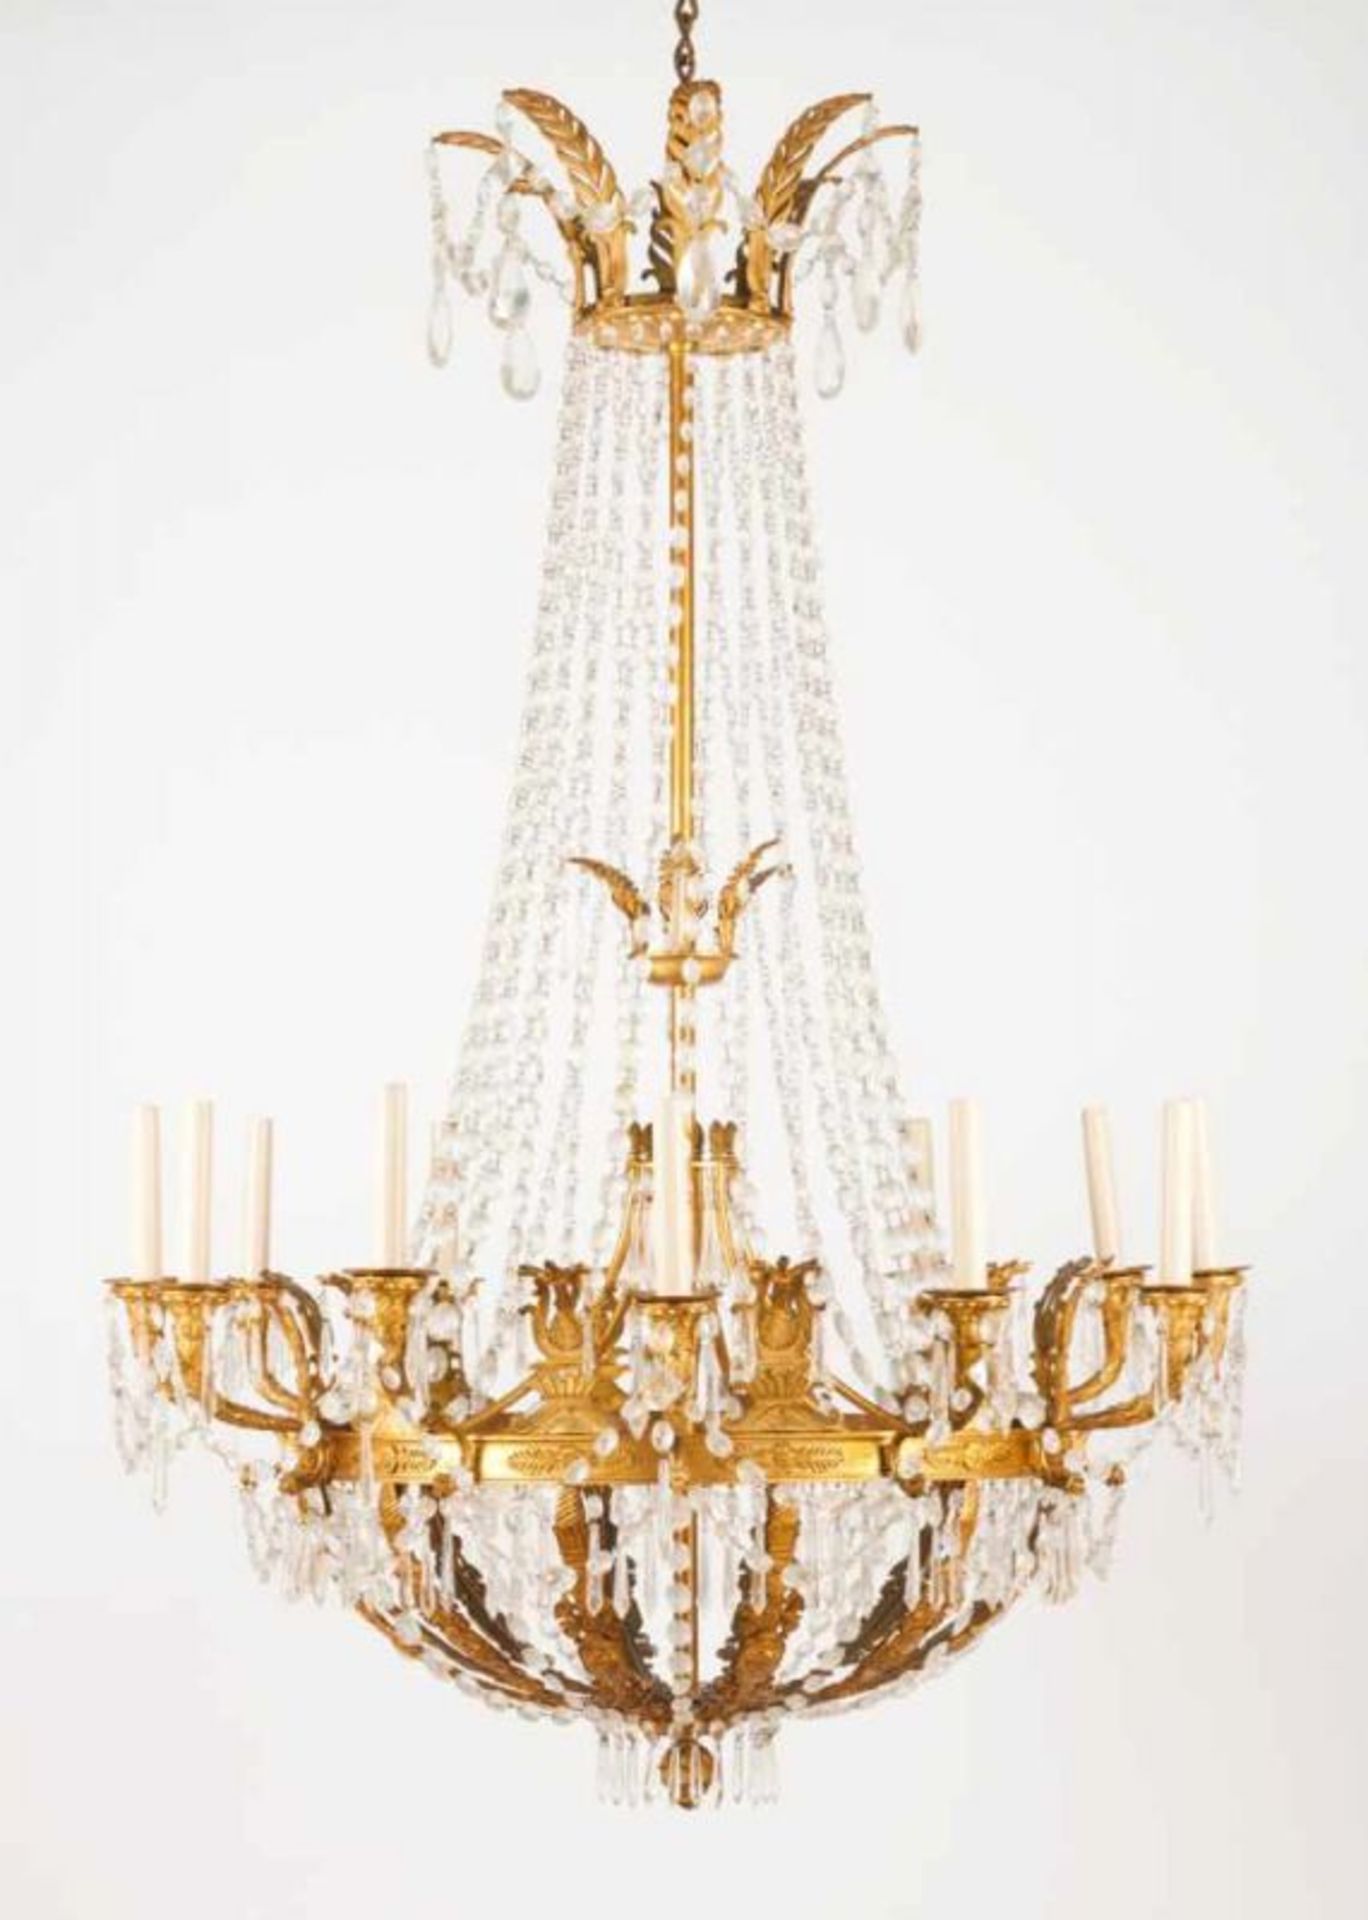 A thirteen-light chandelier in the Empire style Gilt bronze with molded and chiselled decoration